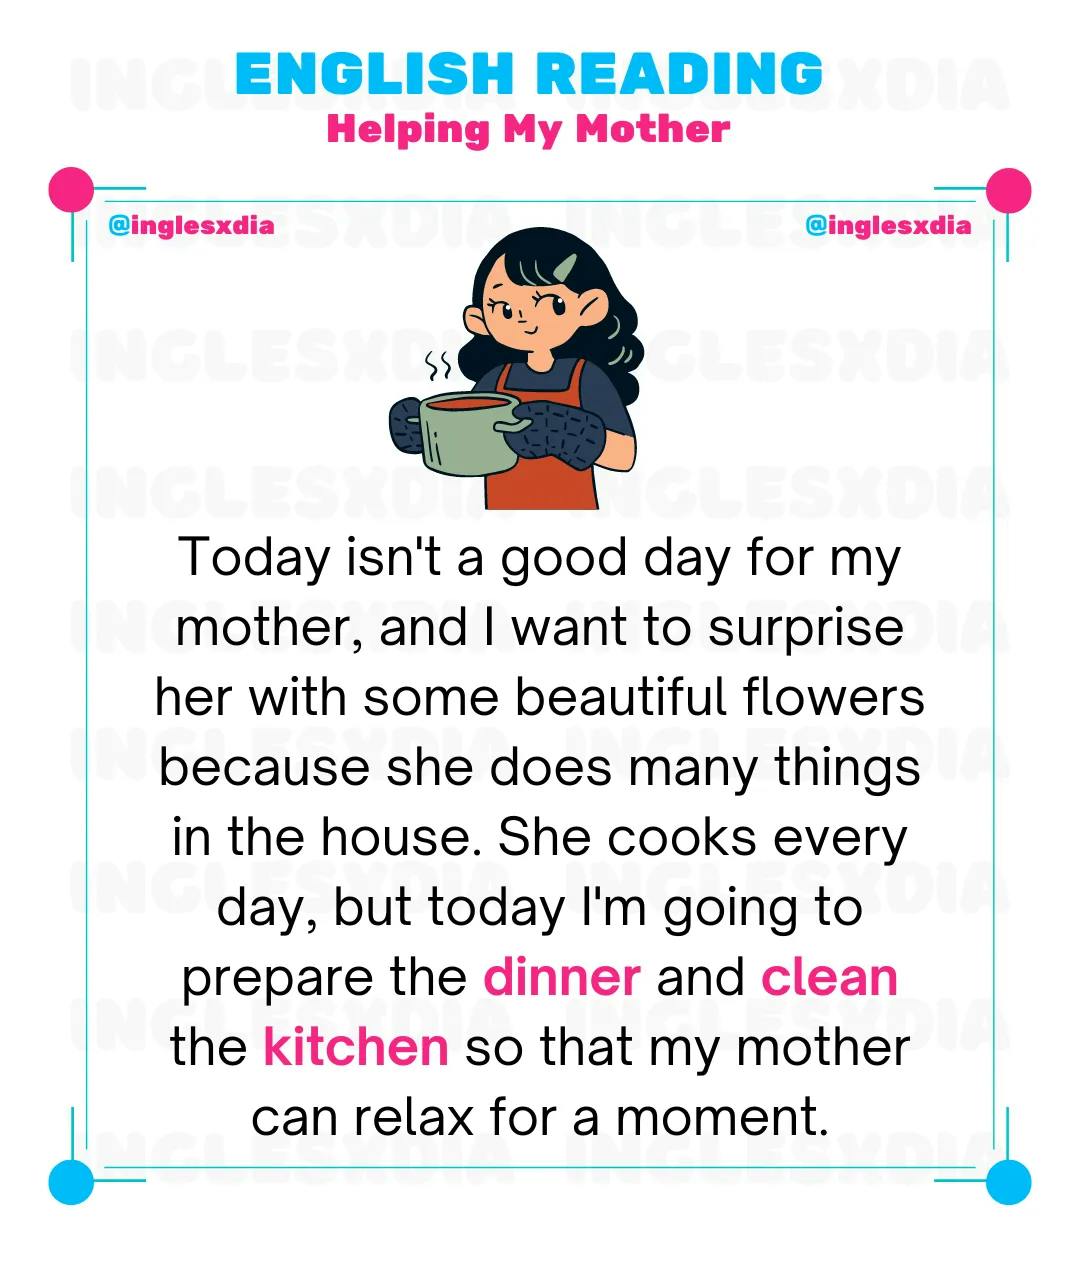 Helping My Mother